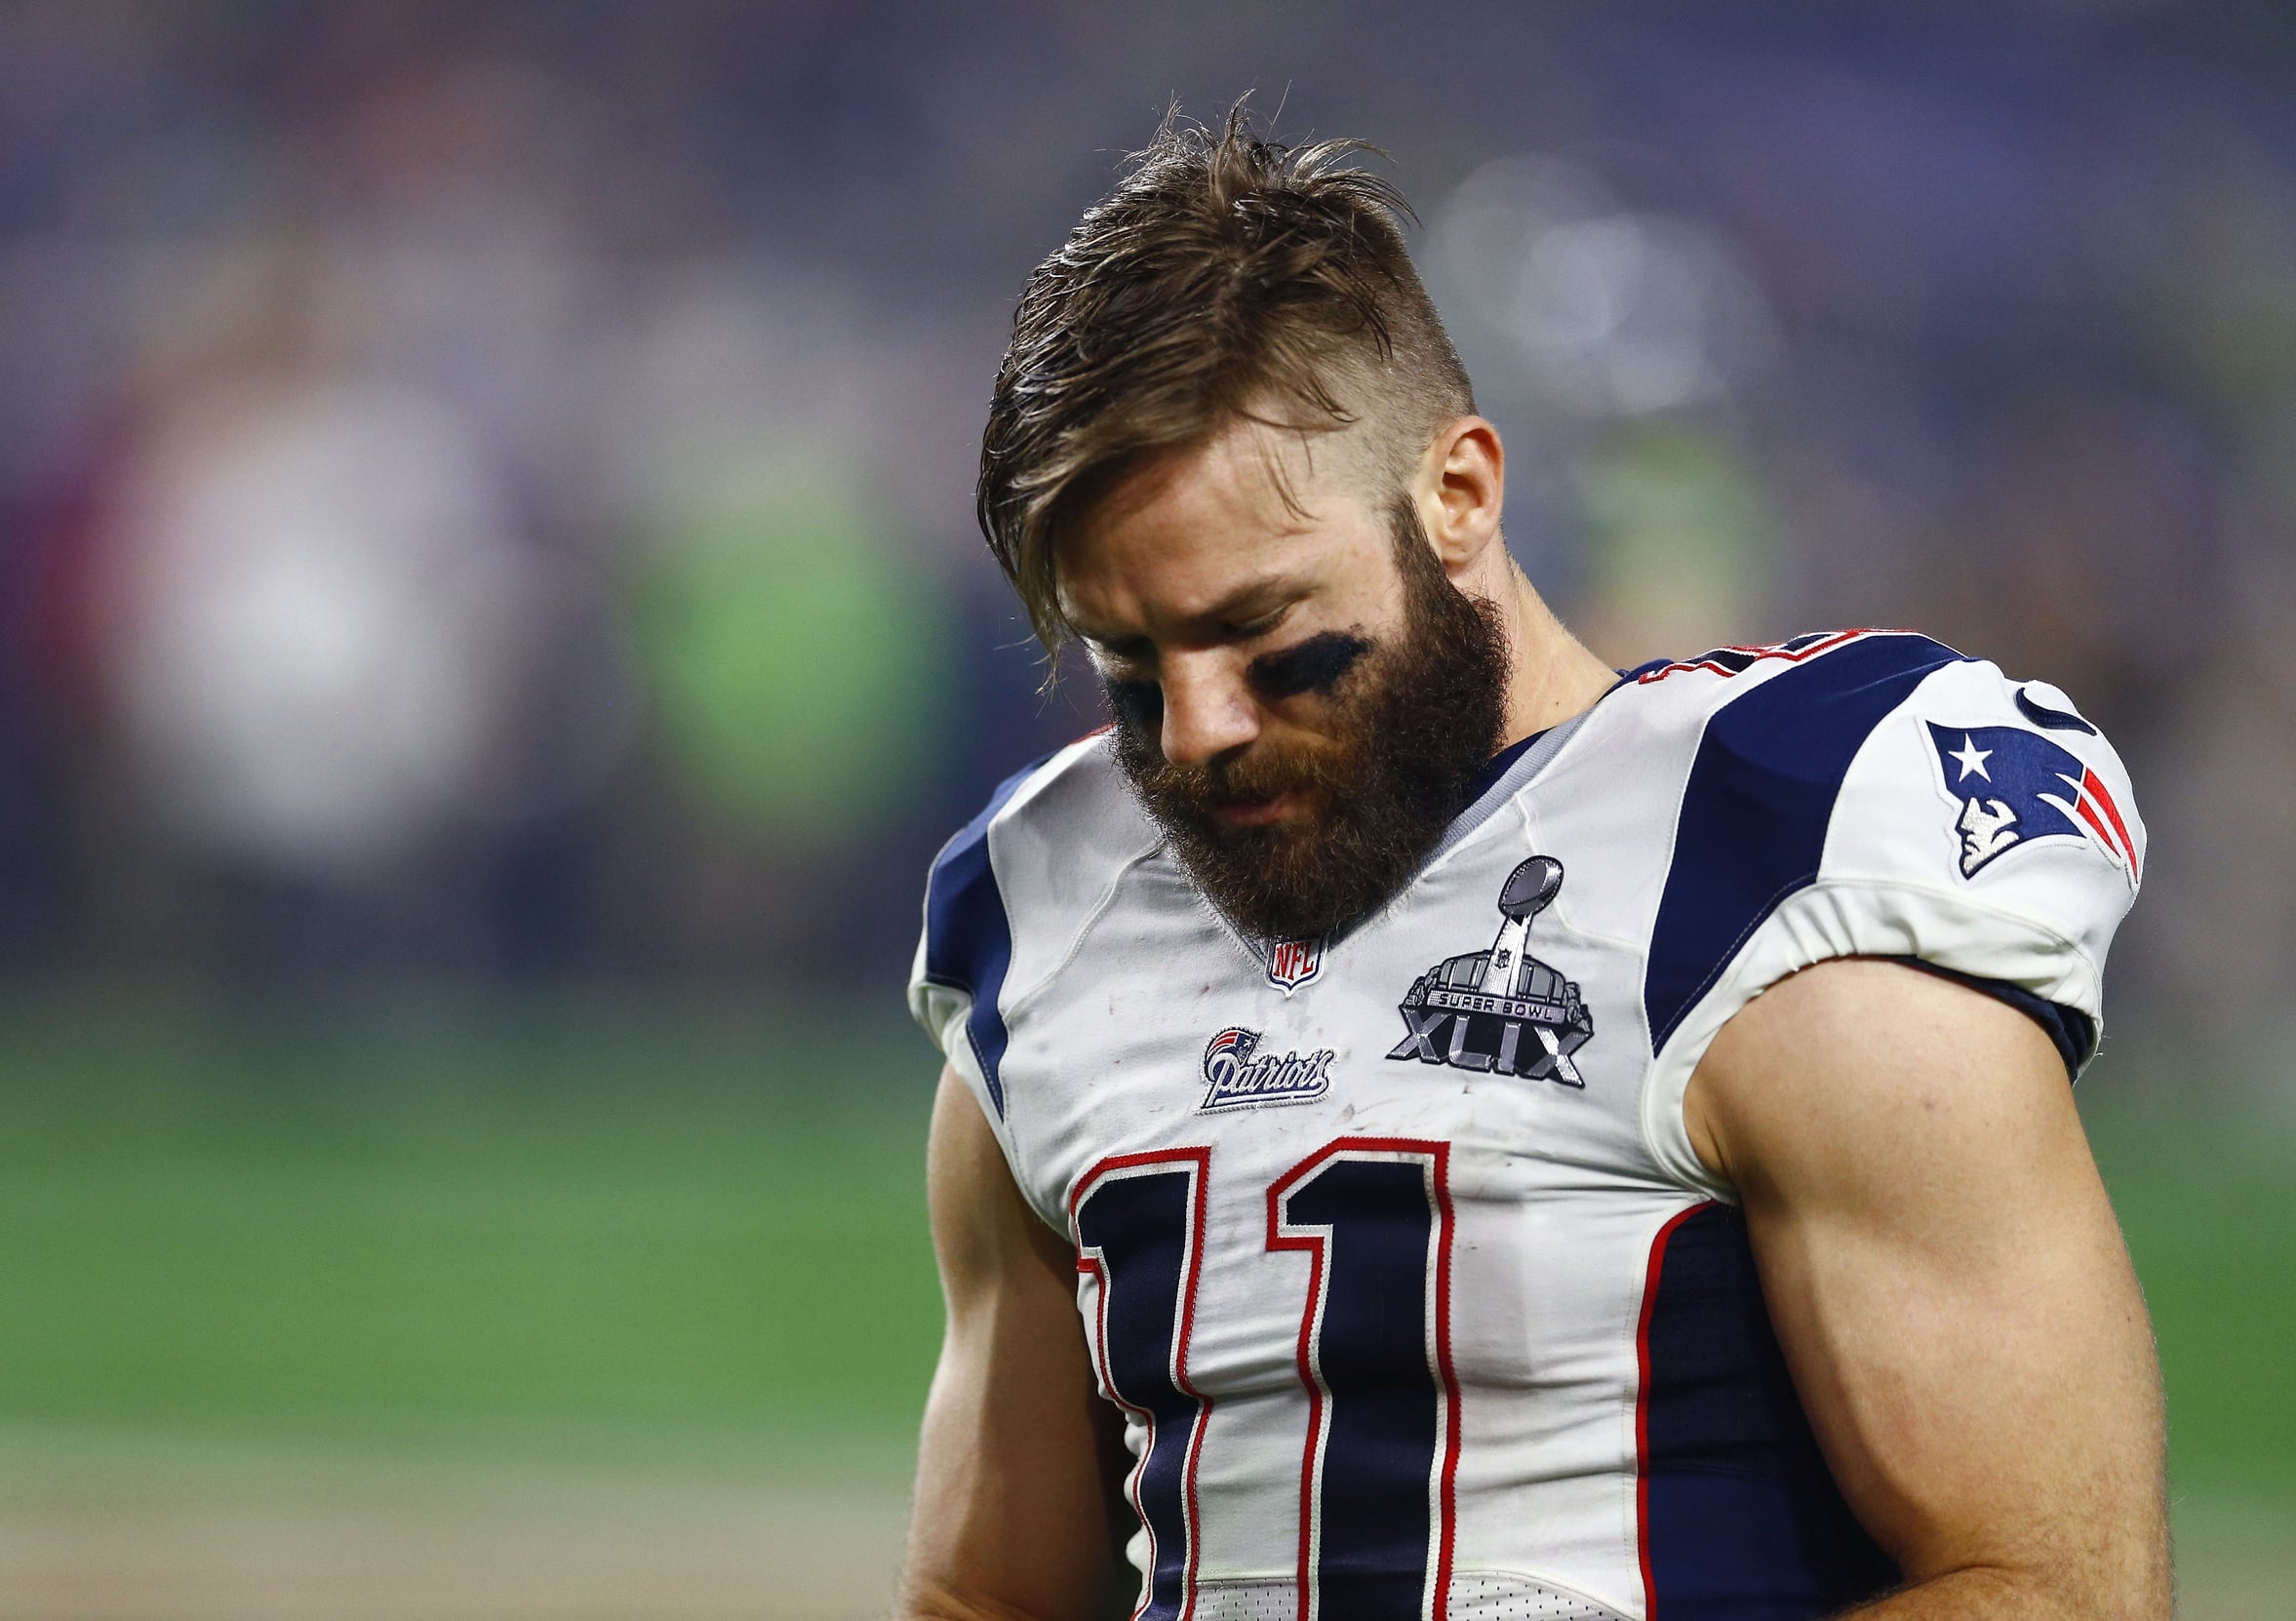 Report: Julian Edelman may not be ready to play in Week 1